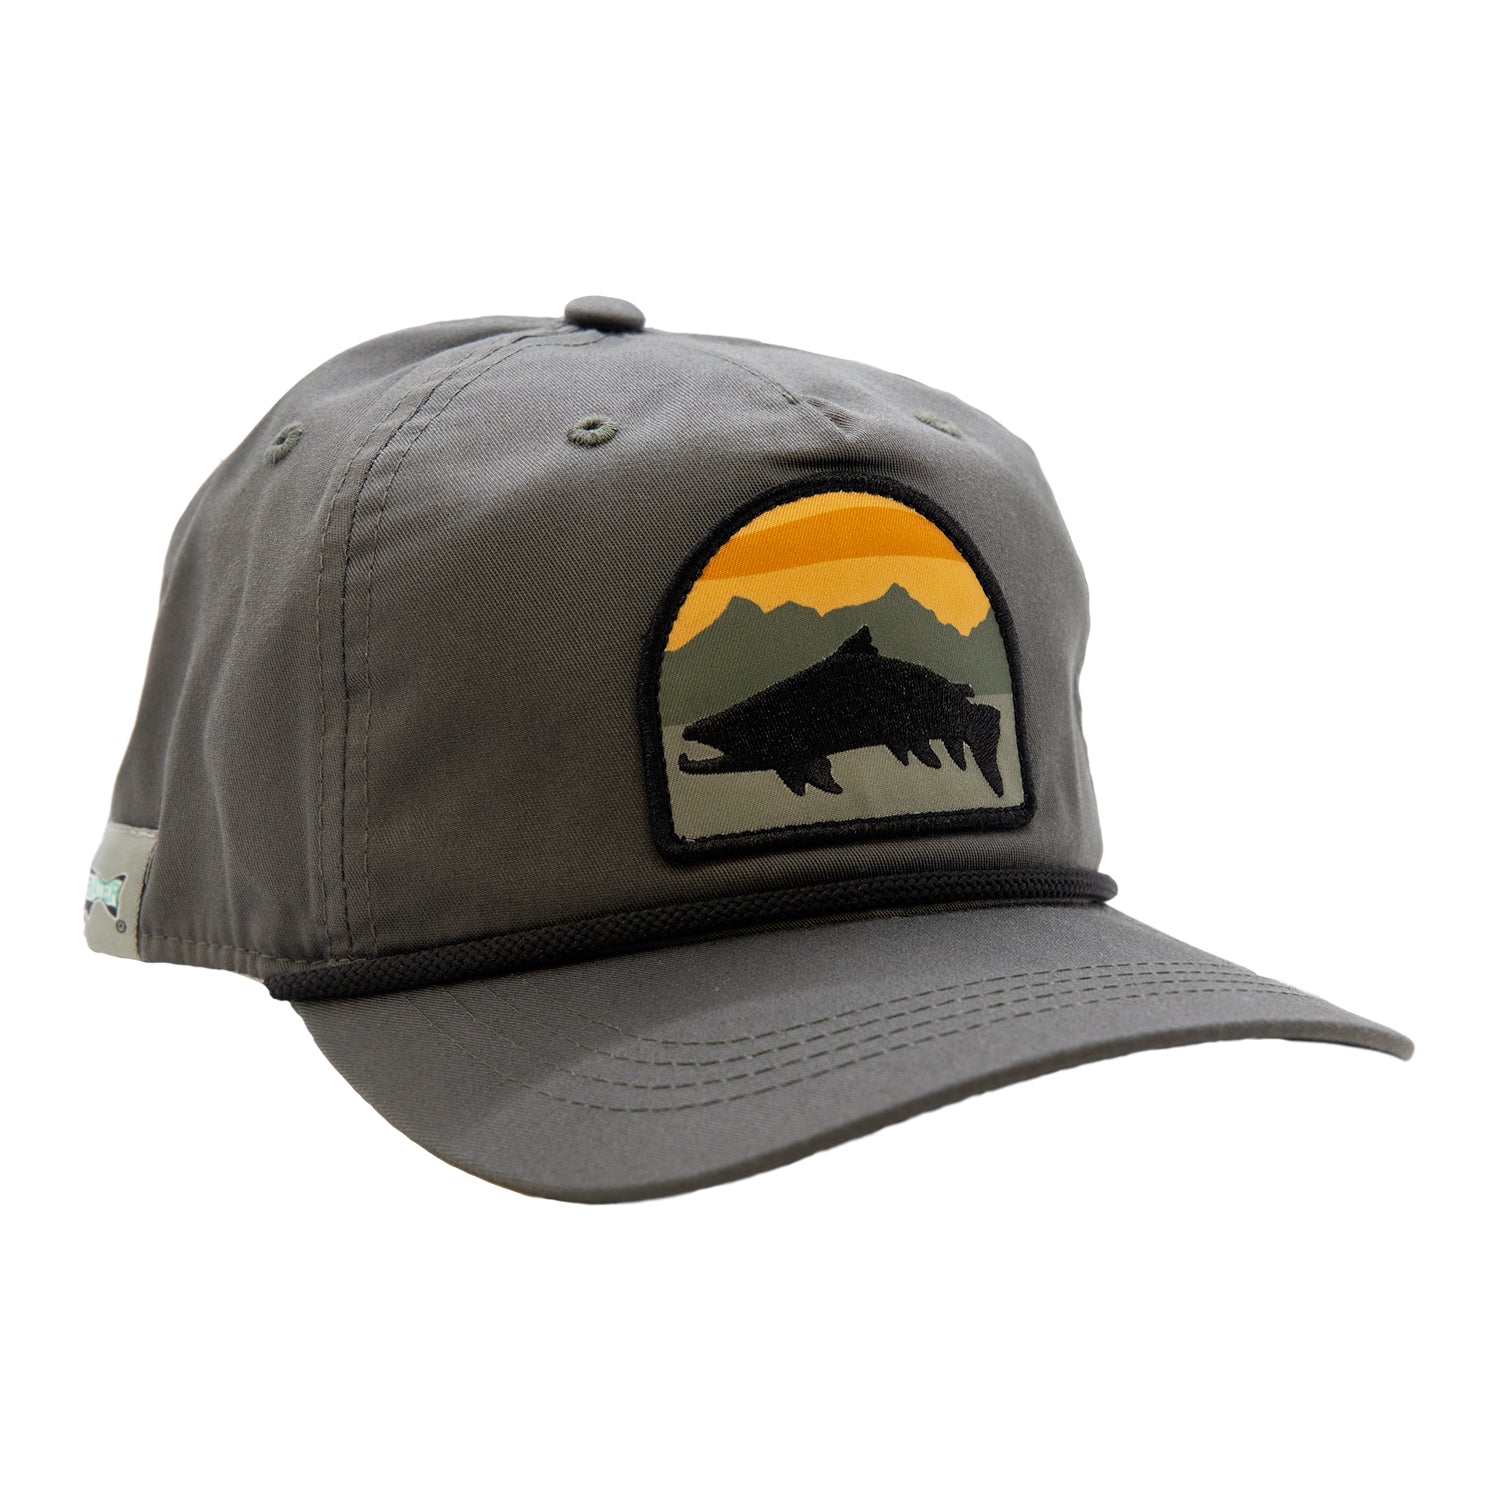 A gray hat with a brim has a patch with a trout in front of a mountain and suns et scene